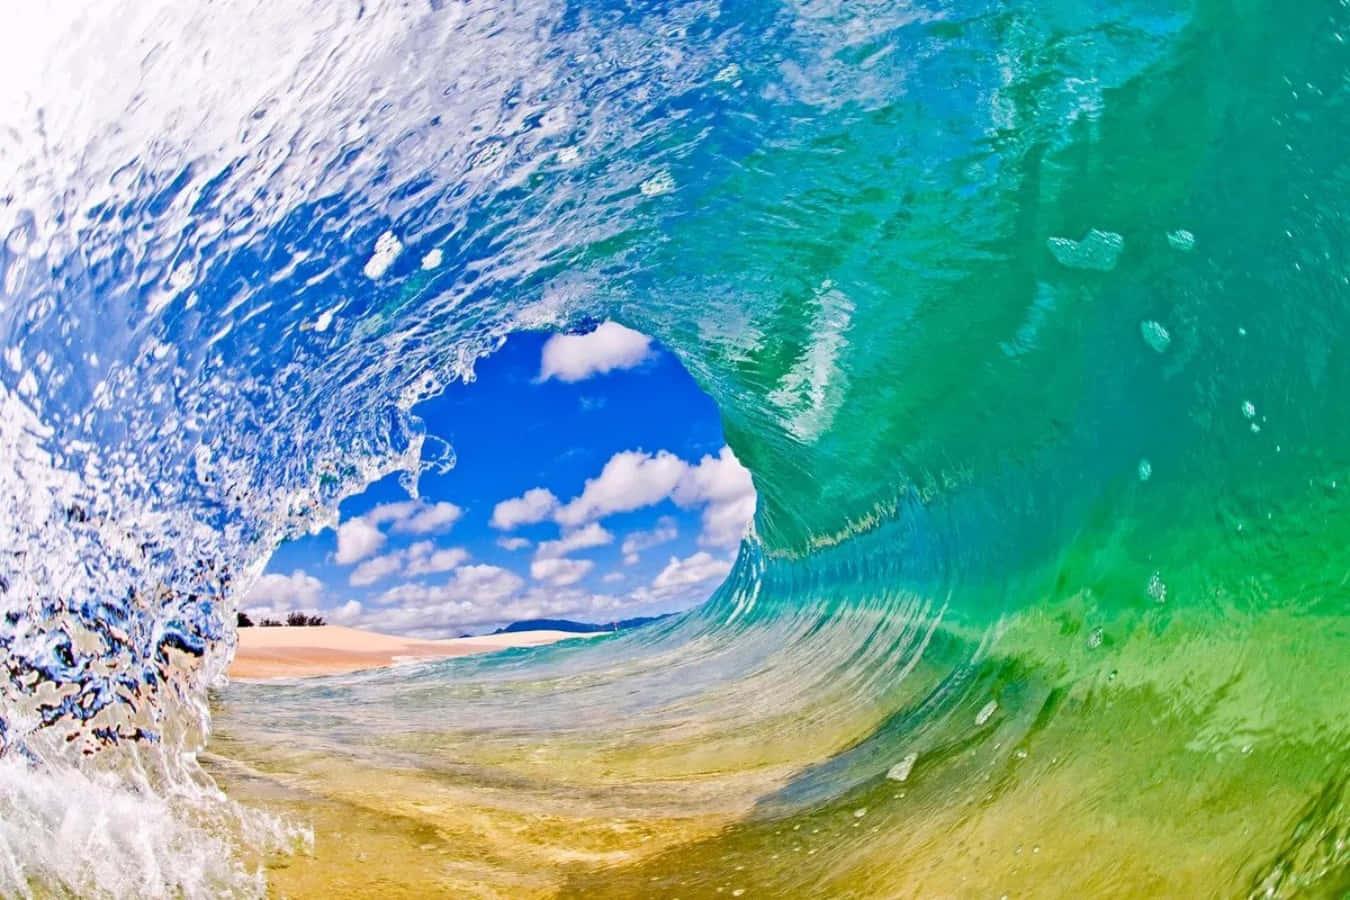 The power of waves can be seen in all their glory.